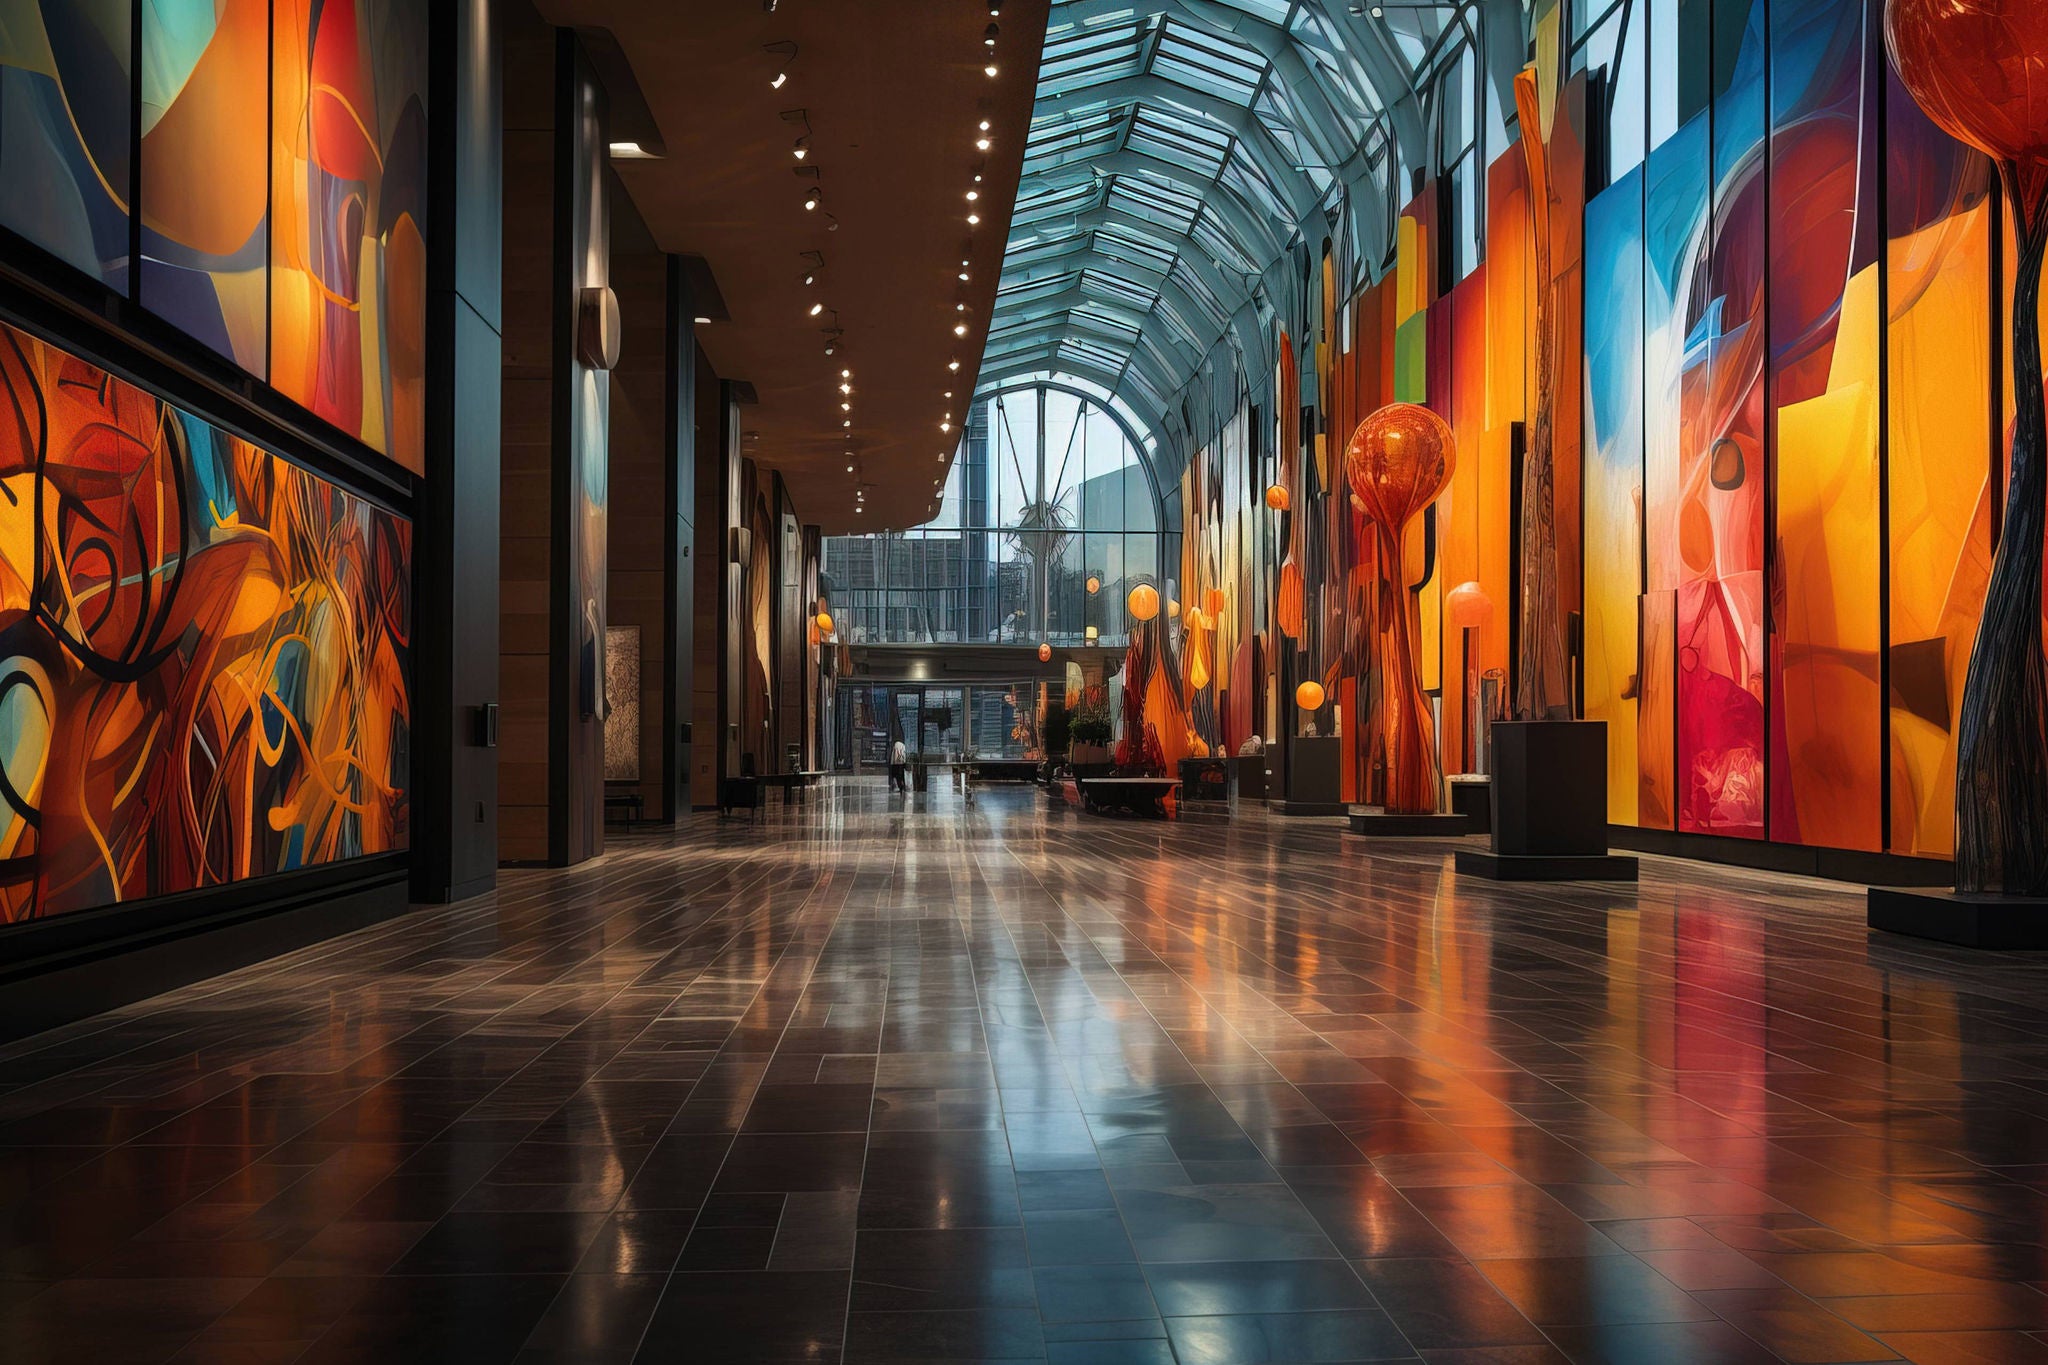 Spacious and modern art gallery interior with vibrant wall art under a glass ceiling, reflecting on glossy floor tiles.